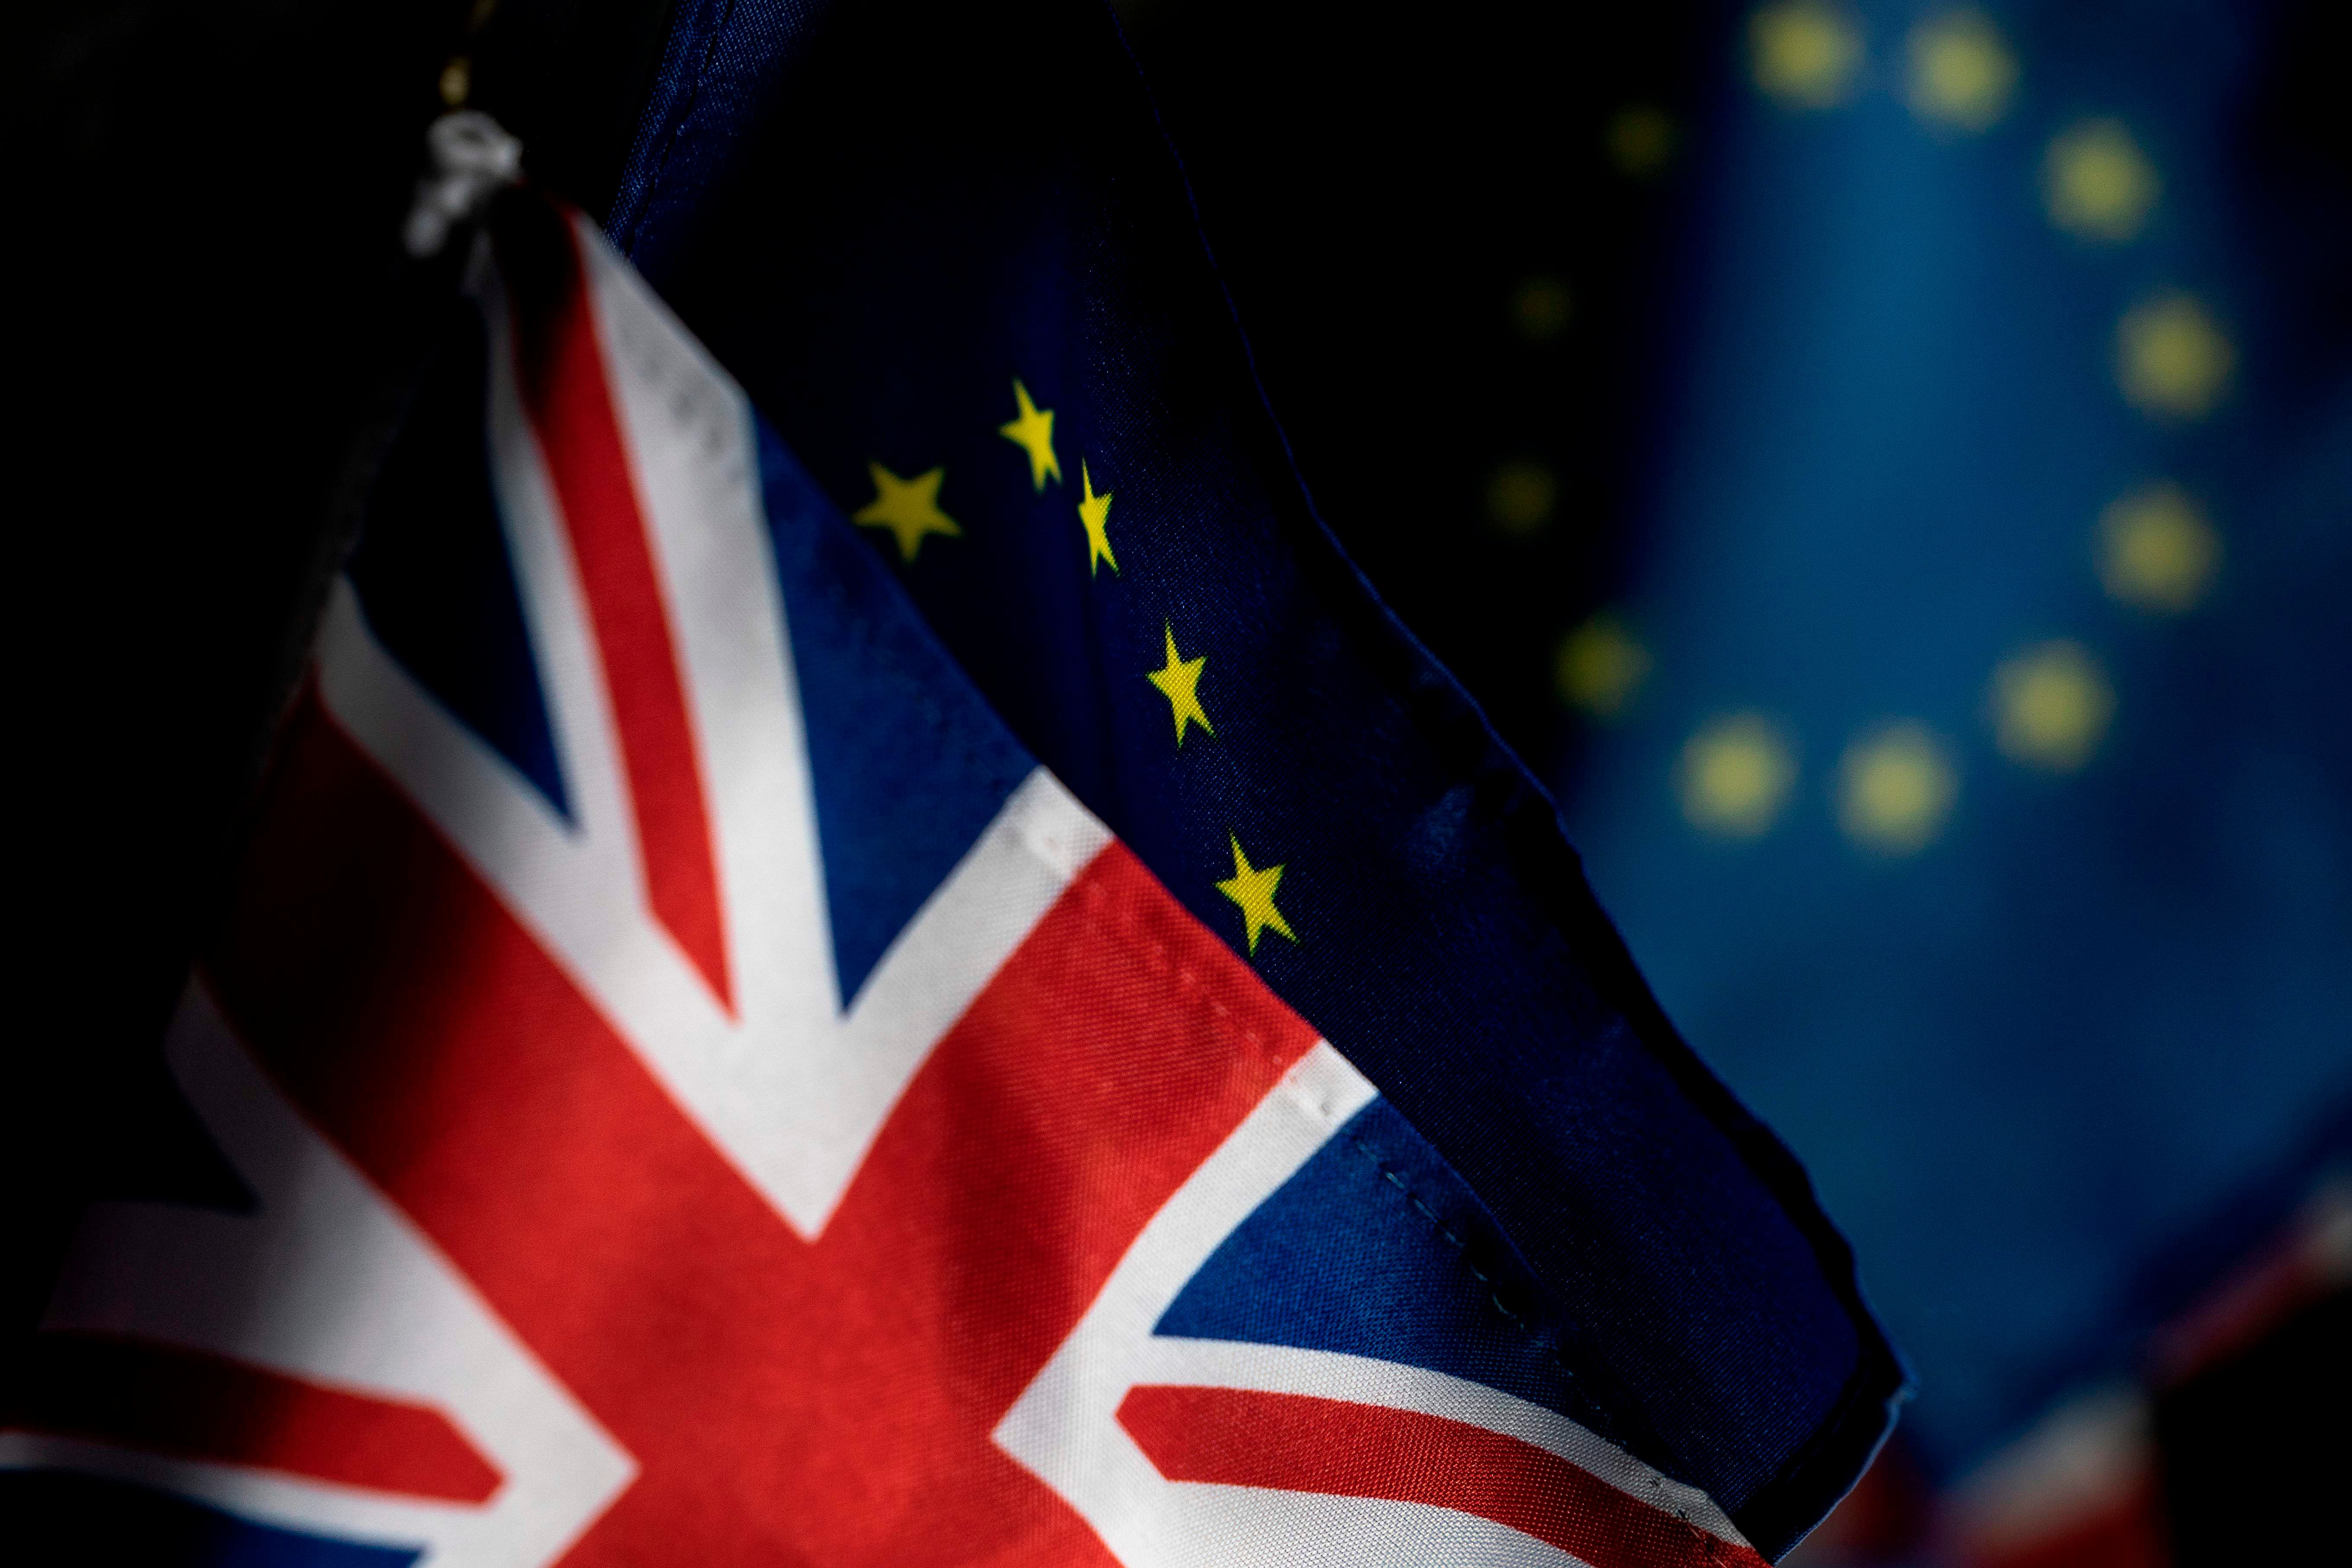 Britain and the European Union have also fallen out politically and diplomatically, with a speed and bitterness that has surprised even pessimists about the relationship. Representative image/Credit: AFP Photo